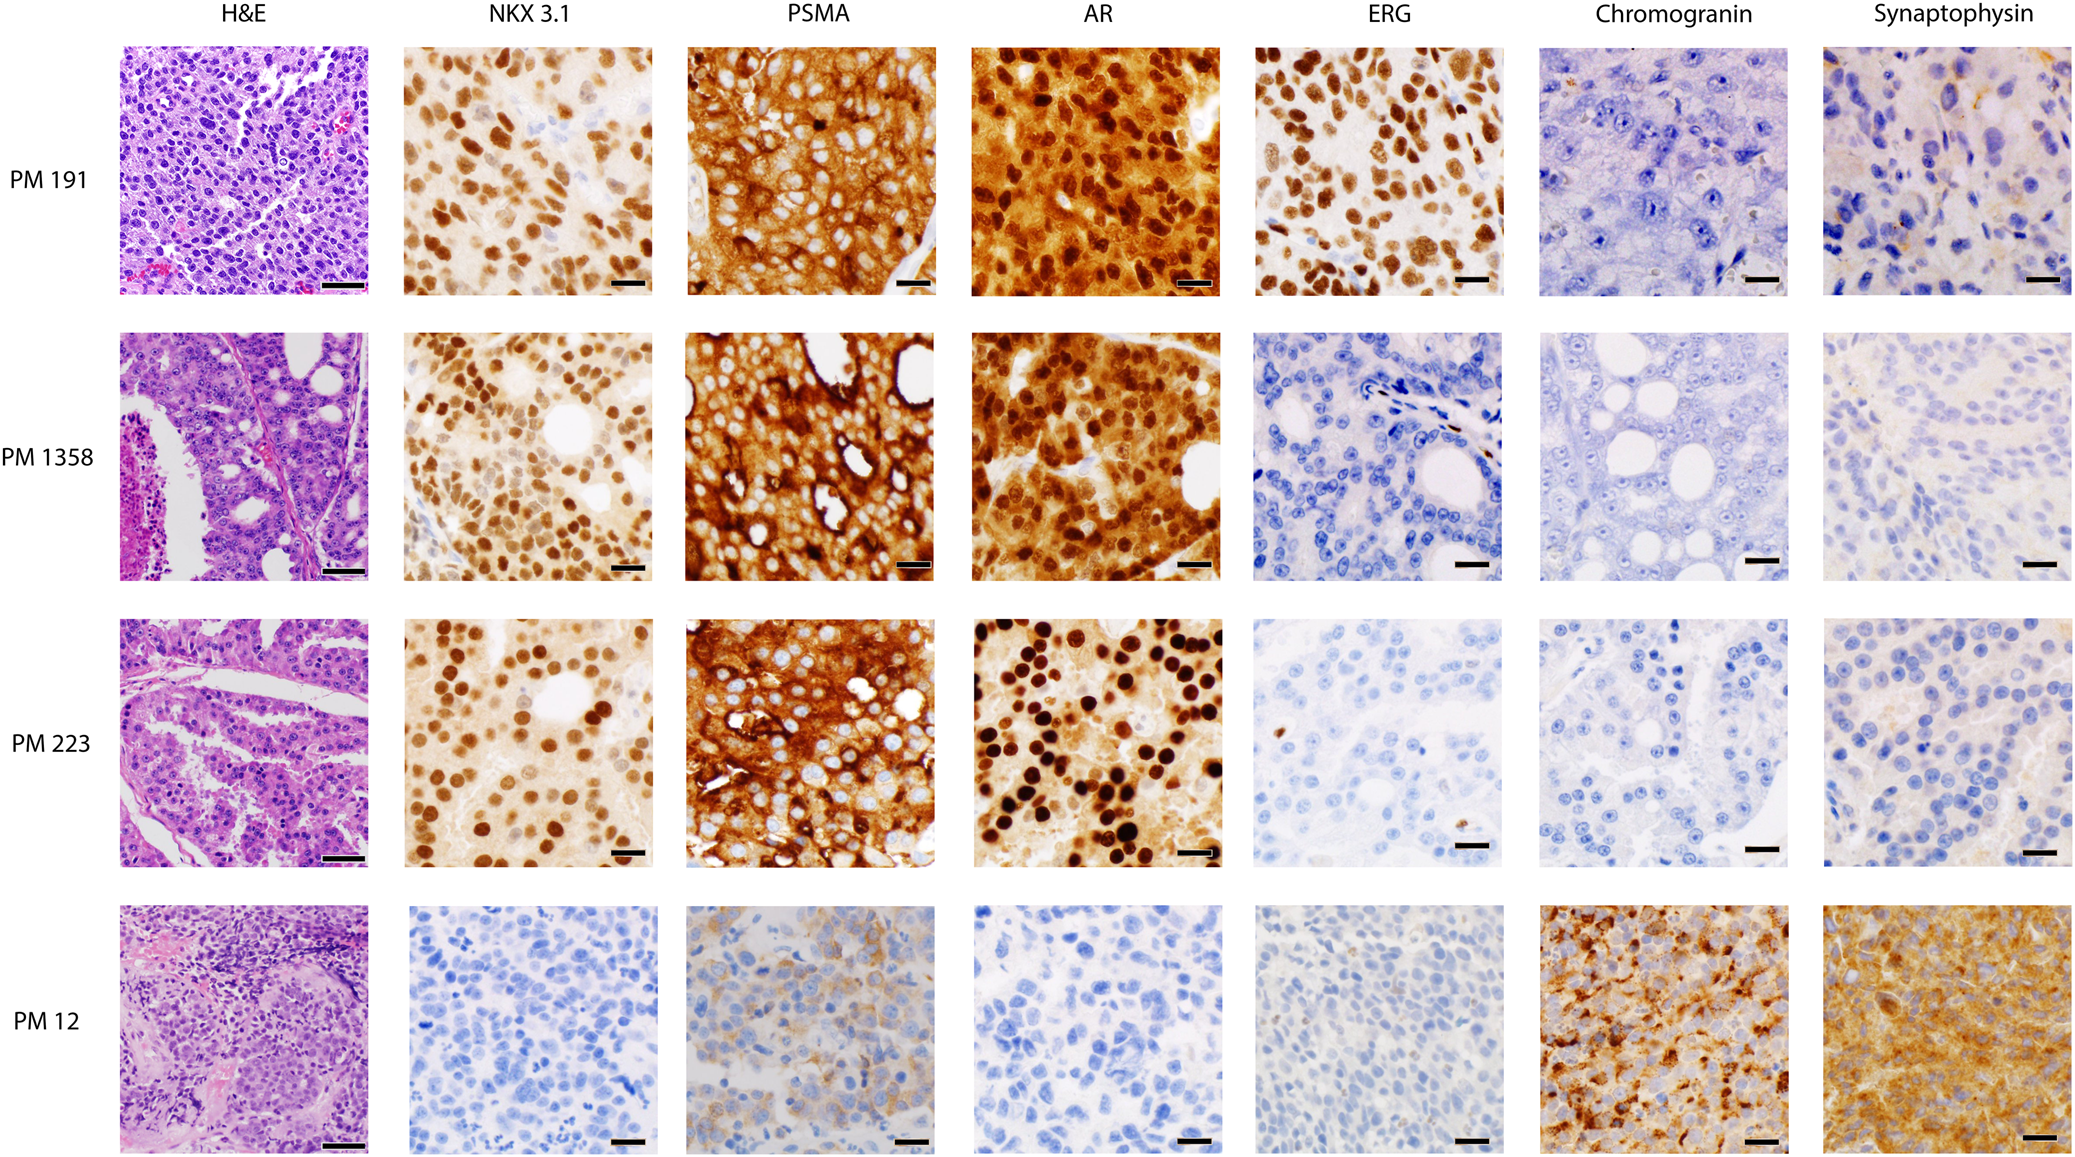 Copy number architectures define treatment-mediated selection of lethal  prostate cancer clones